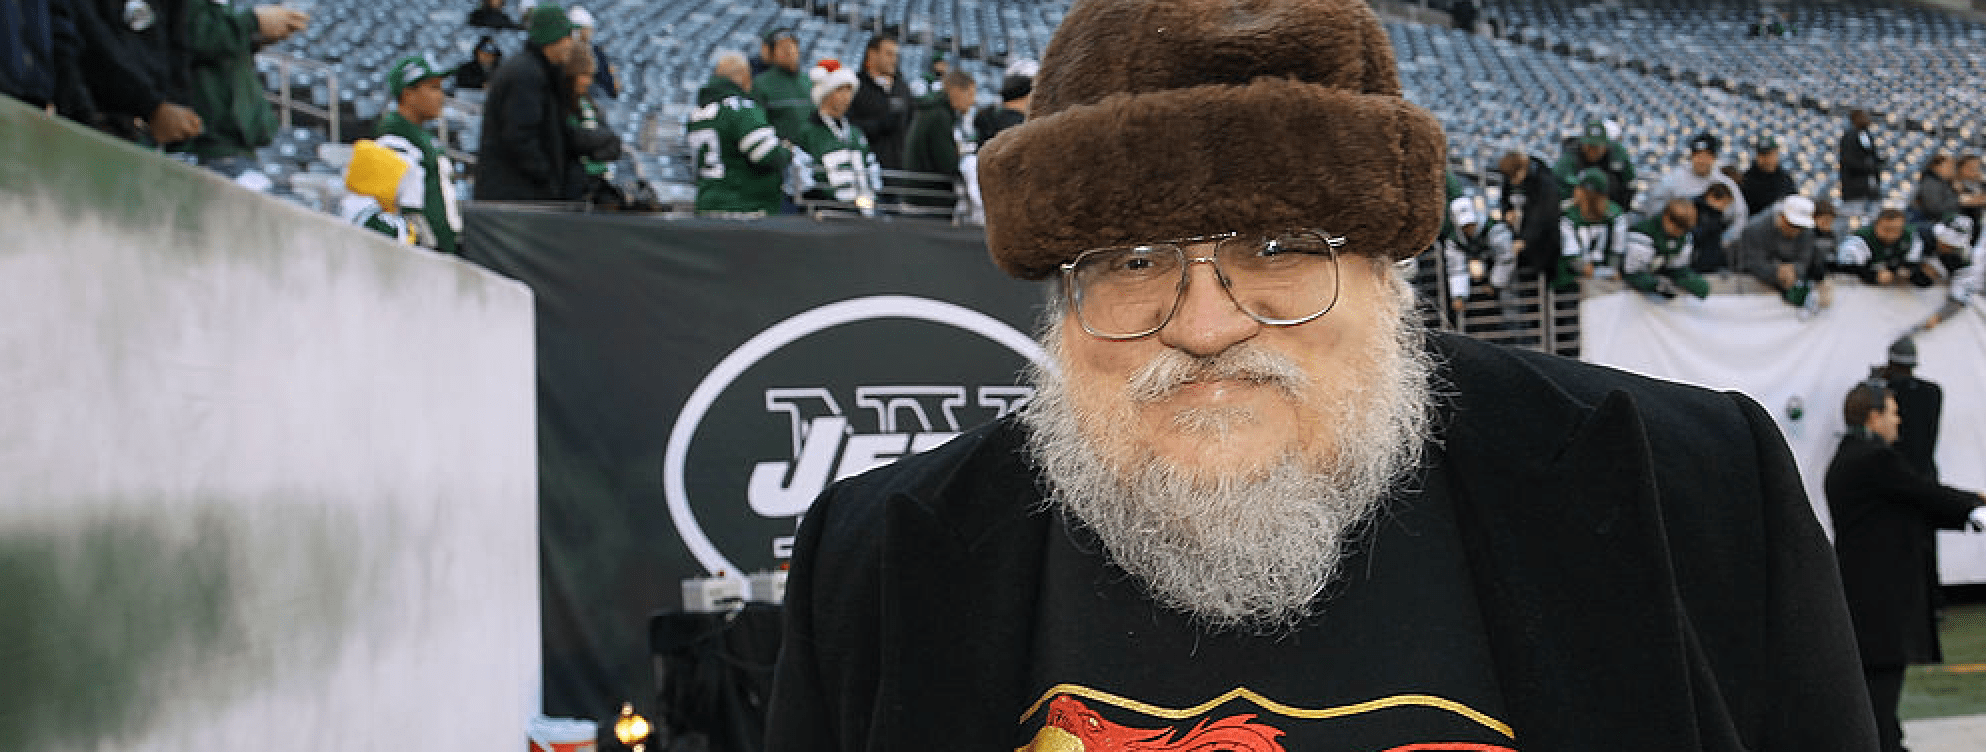 EAST RUTHERFORD, NJ - DECEMBER 11:  Game of Thrones Author George R.R. Martin attends the Kansas City Chiefs vs New York Jets game at MetLife Stadium on December 11, 2011 in East Rutherford, New Jersey.  (Photo by Al Pereira/WireImage)